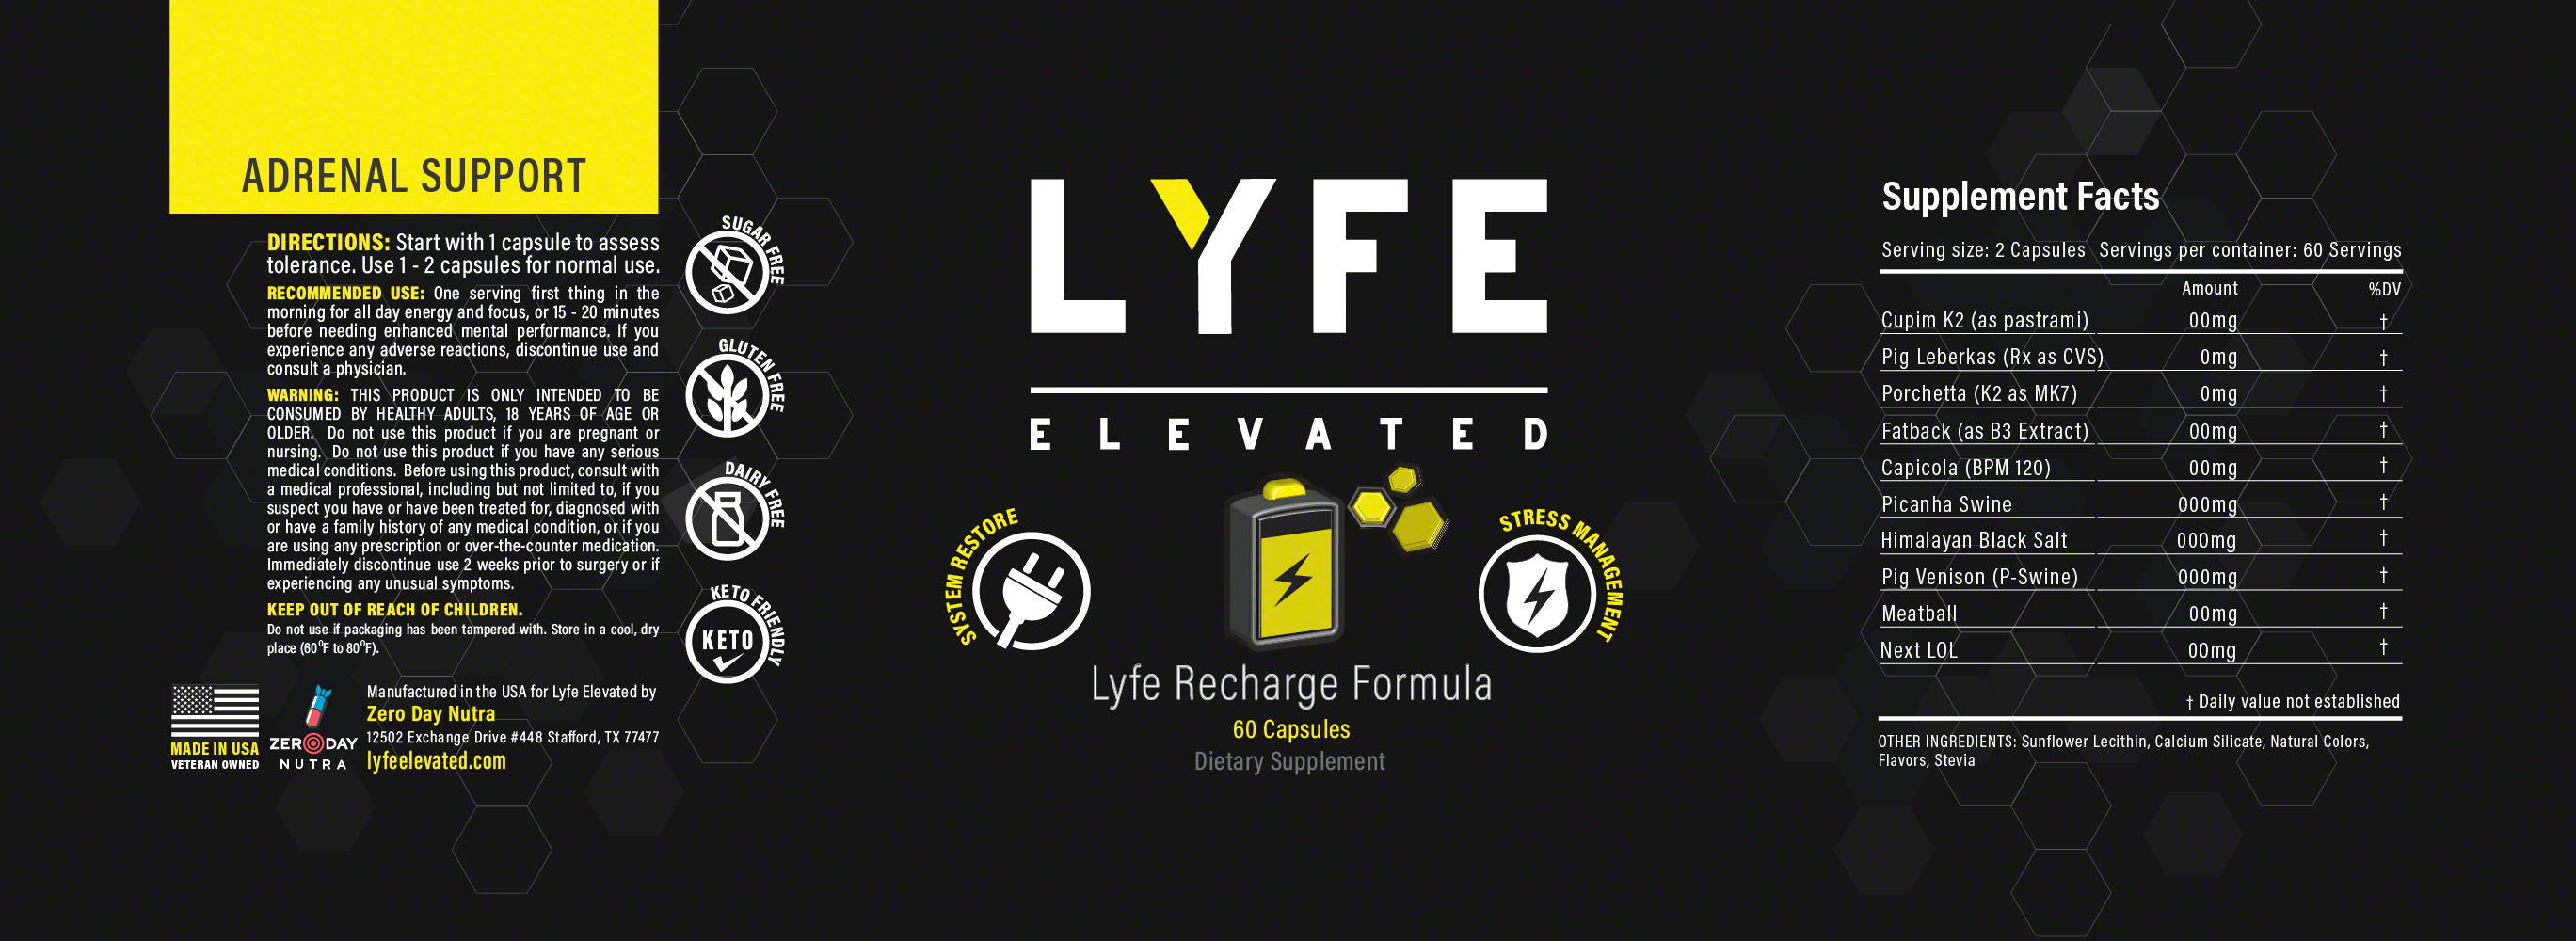 Dalya Kandil designed logos and product packaging for LyfeElevated, Micheal Ulisse contributed to marketing and formulations